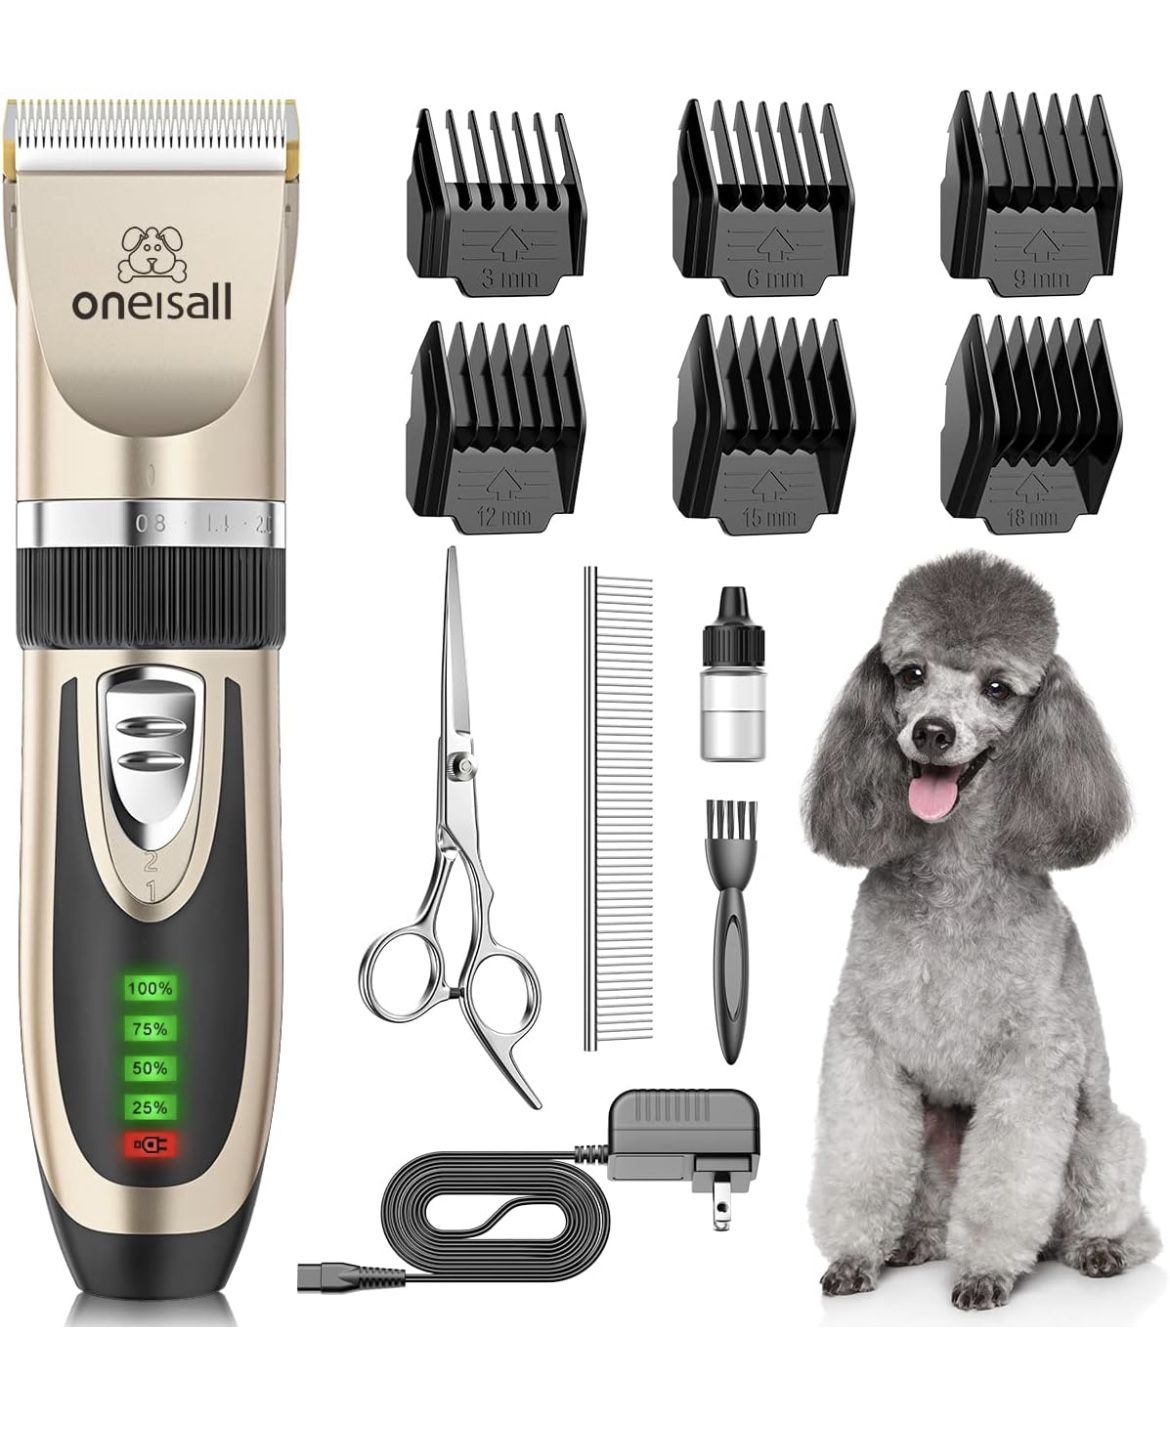 oneisall Dog Clippers Low Noise, 2-Speed Quiet Dog Grooming Kit Rechargeable Cordless Pet Hair Clipper Trimmer Shaver for Small and Large Dogs Cats An